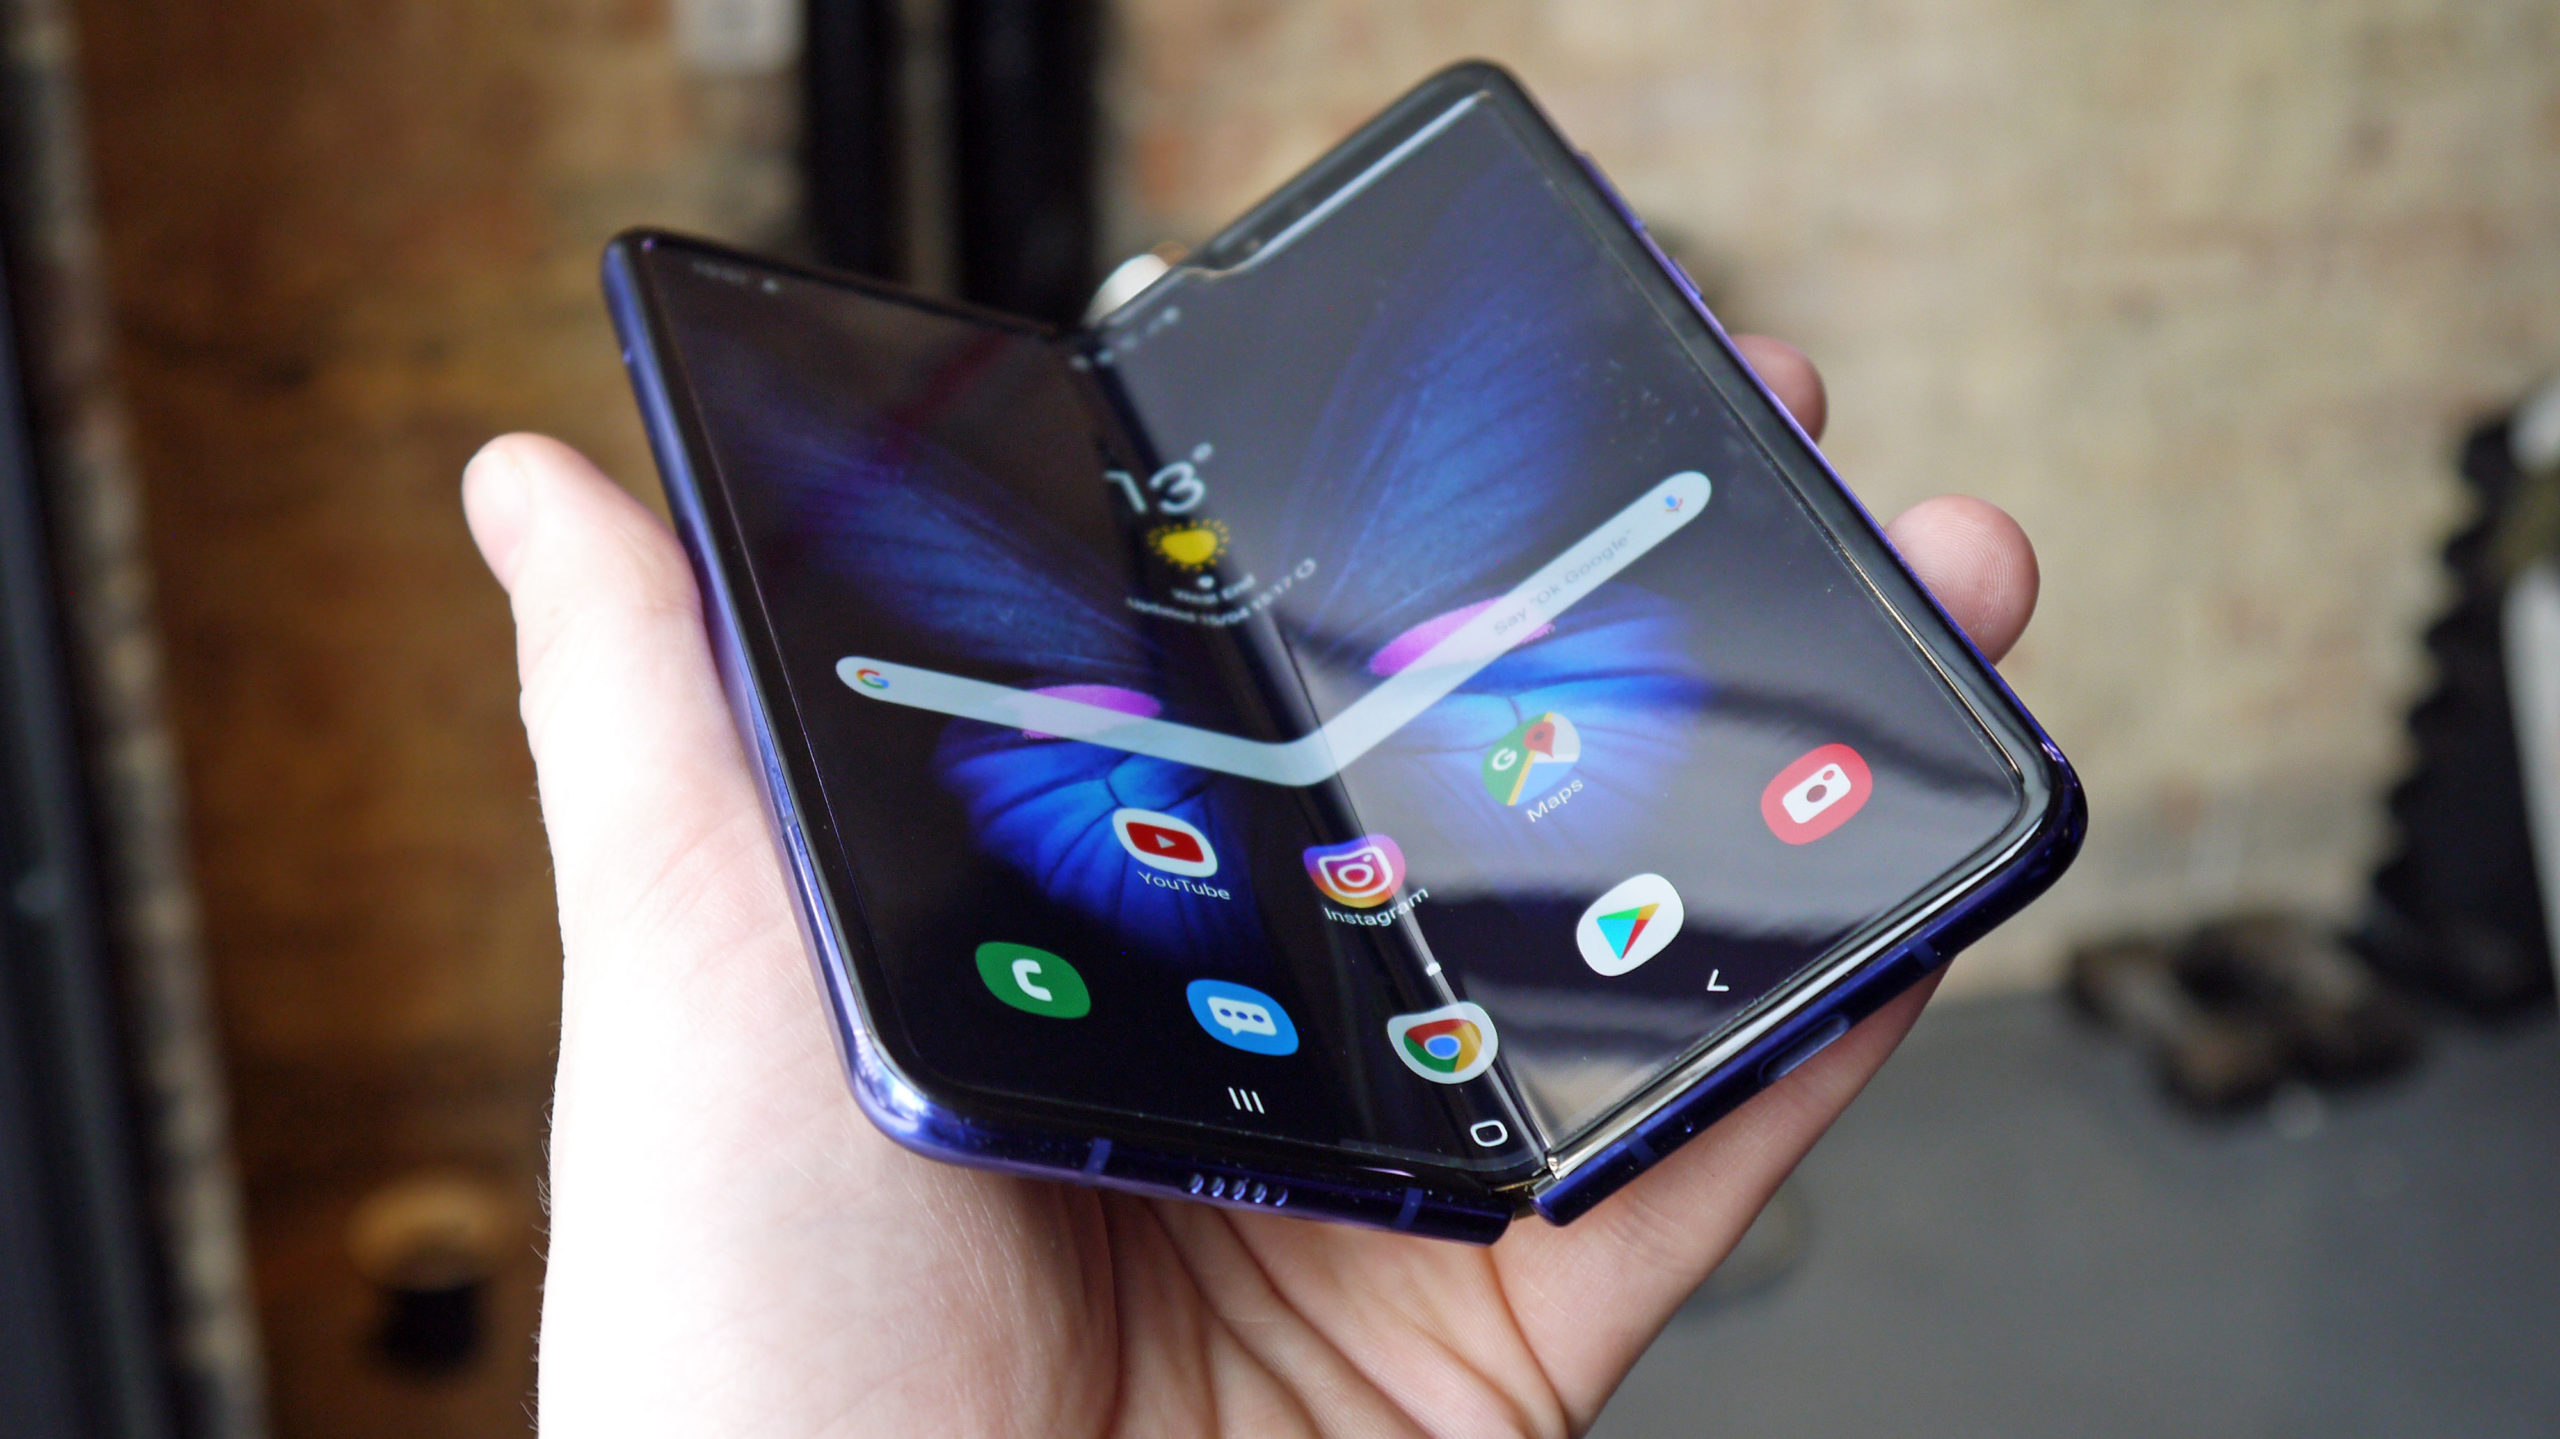 Samsung is currently pushing the Galaxy Fold onto the Android 10 table too